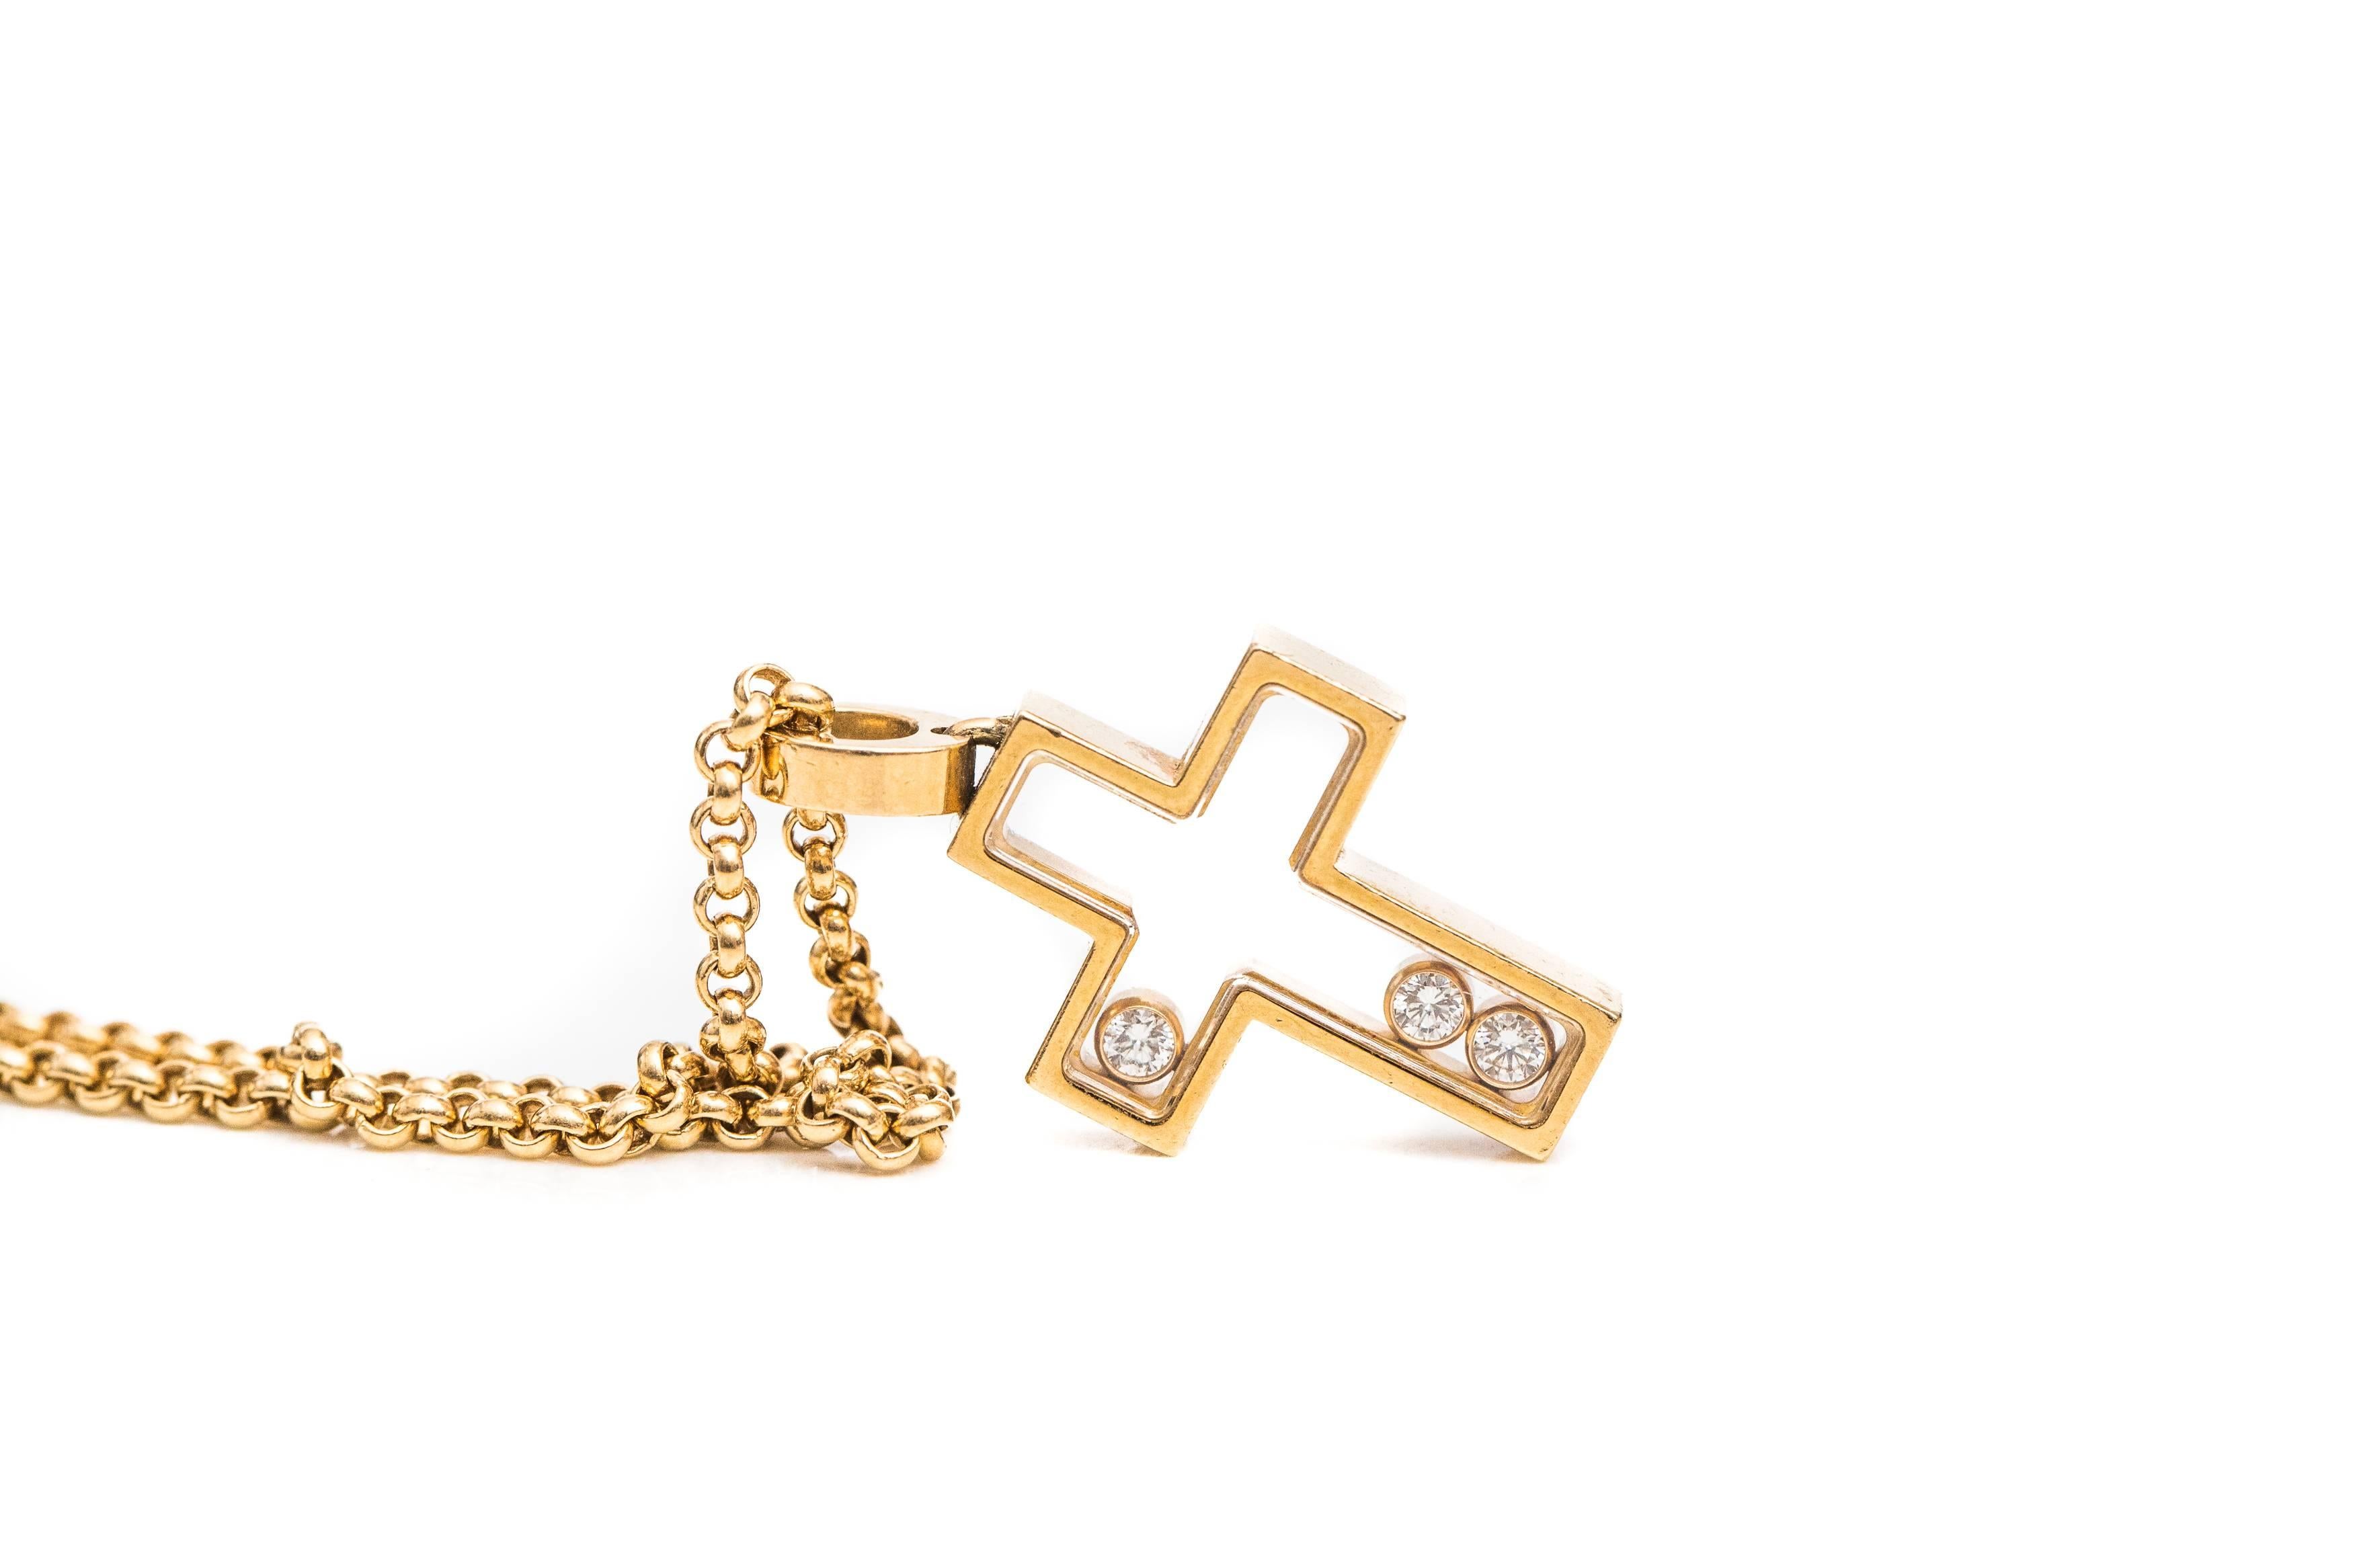  Number 79/4009 Chopard Happy Diamond Collection Cross Pendant Necklace - 18 Karat Yellow Gold featuring Diamonds

Features 3 Diamonds Floating in a high polish 18 Karat Yellow Gold and Glass Cross. The Pendant has a rich 18 Karat Yellow Gold frame